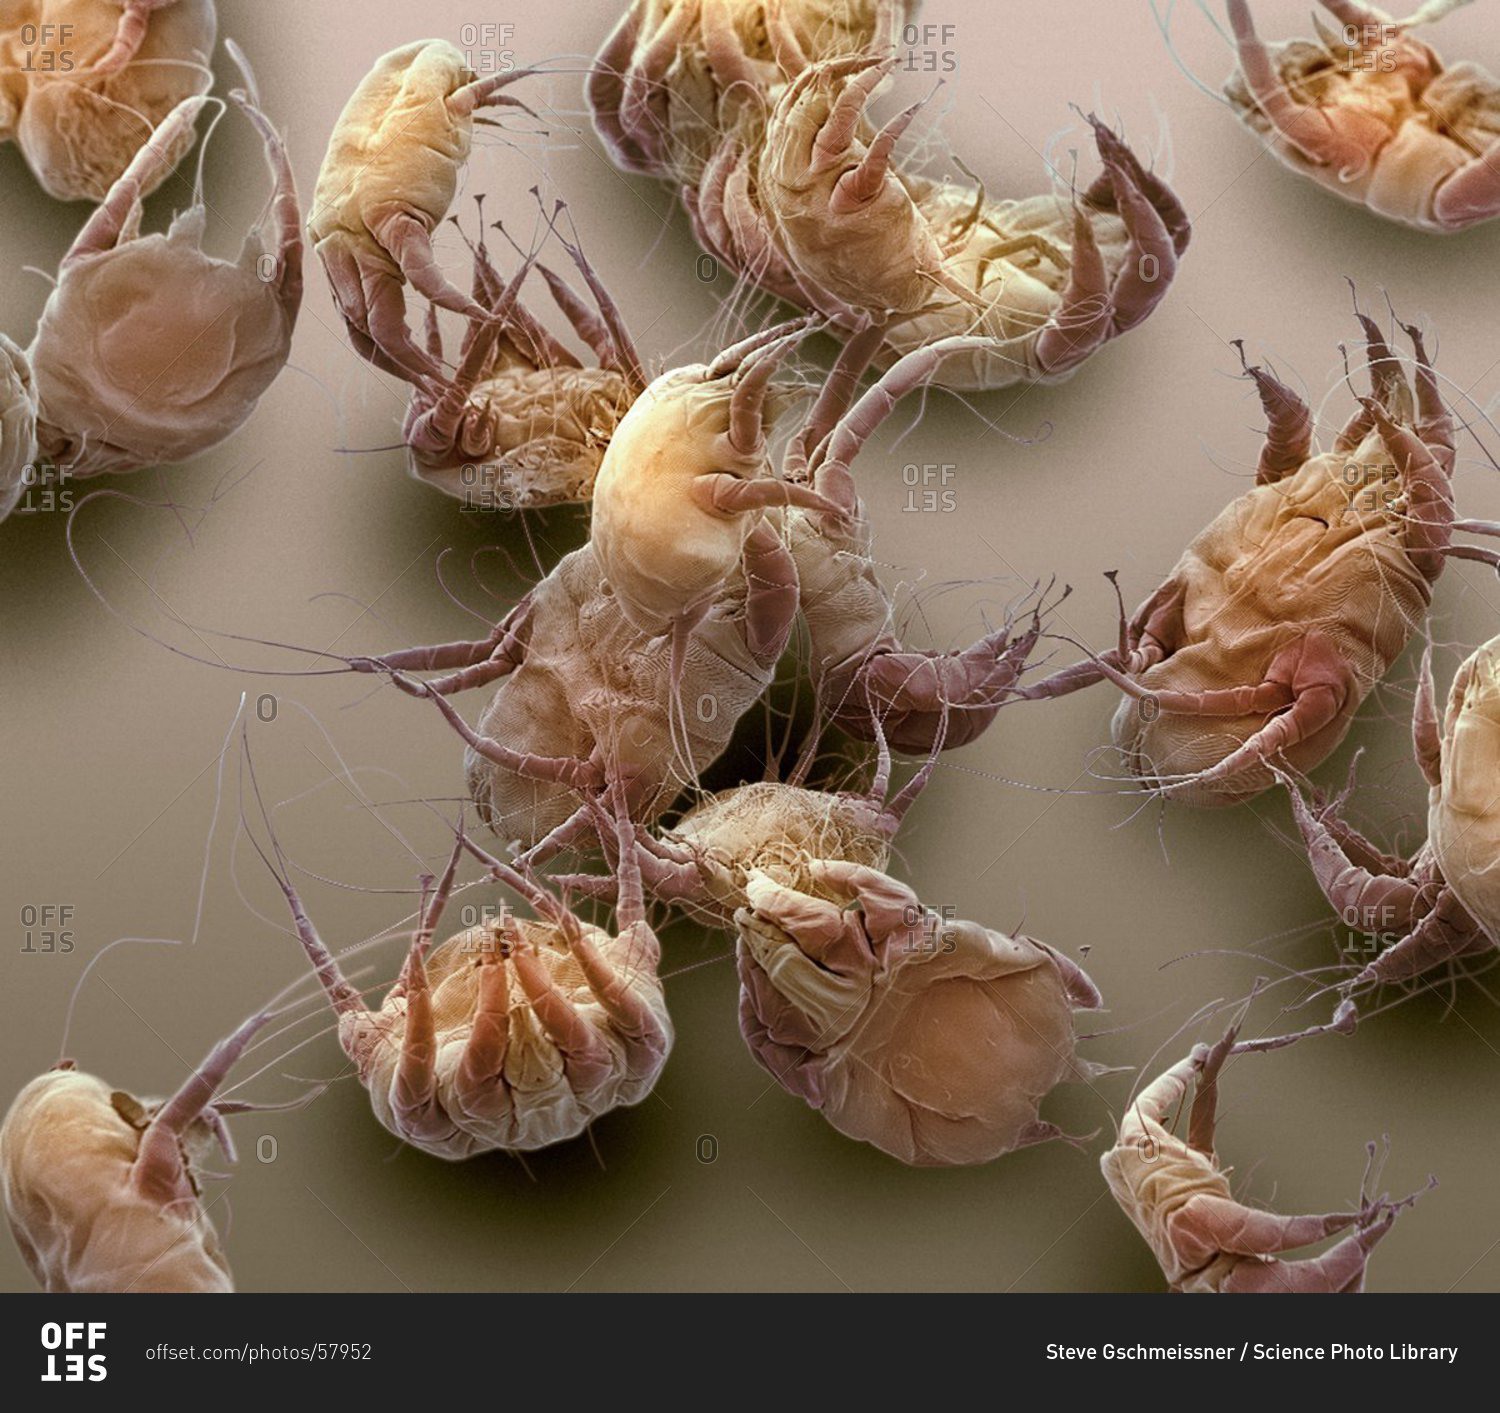 Color scanning electron micrograph of house dust mites (Dermatophagoides pteronyssinus).